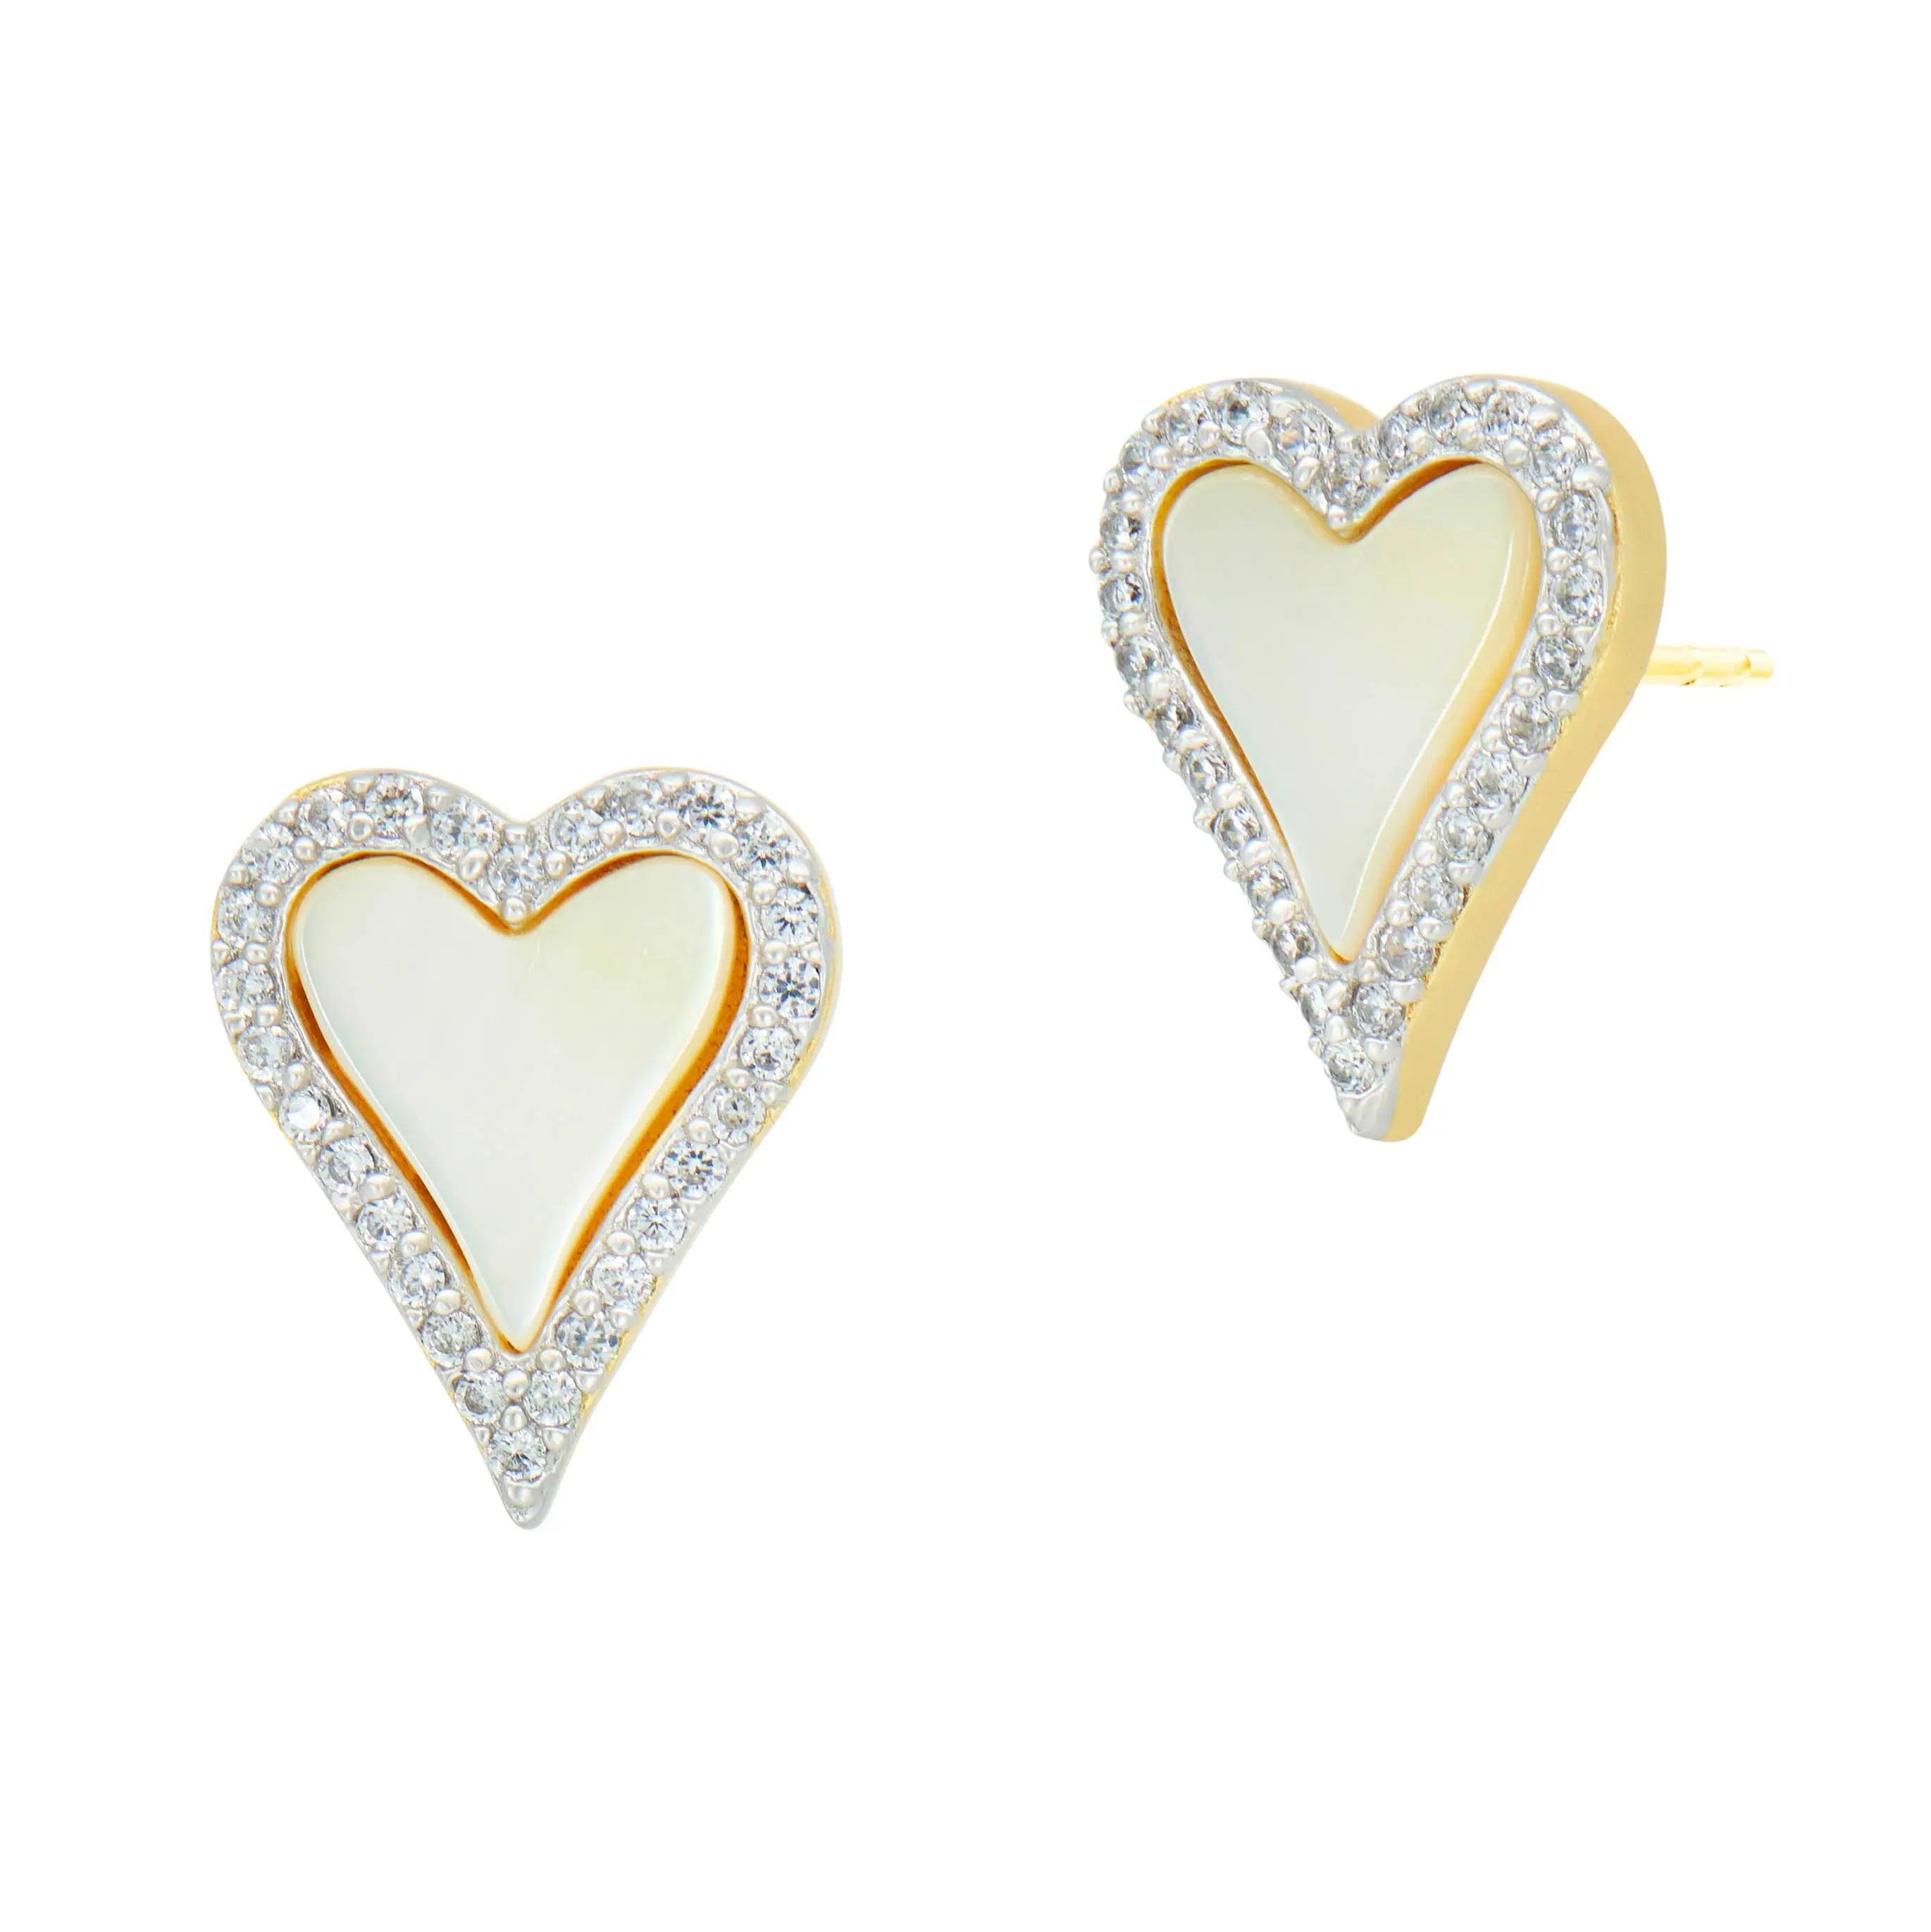 Freida Rothman From the Heart Mother of Pearl Heart Stud Earrings 0